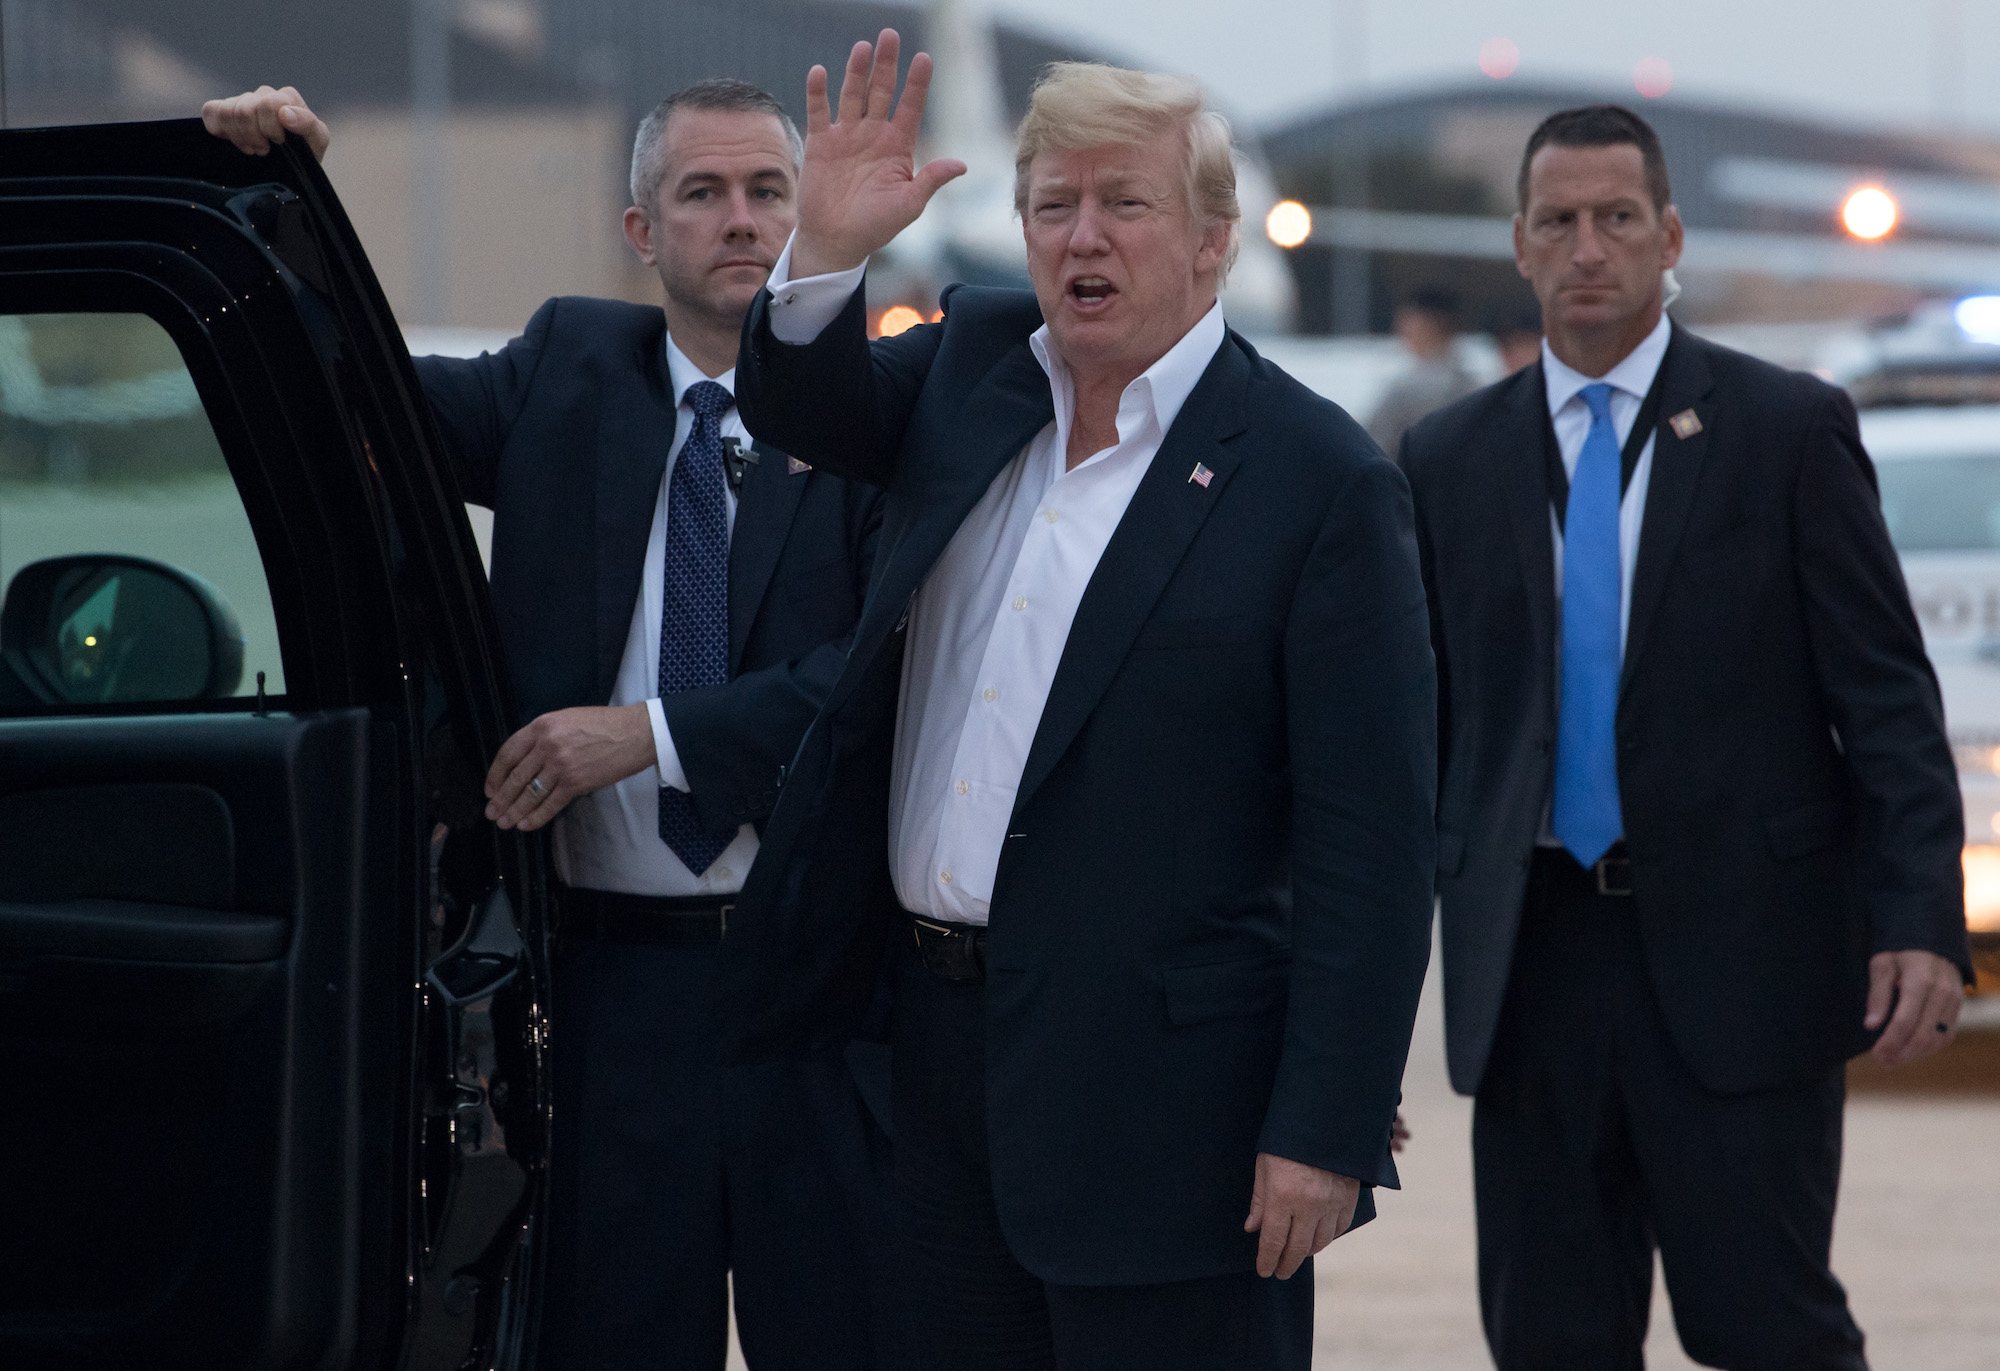 Donald Trump gets into his SUV after disembarking from Air Force One